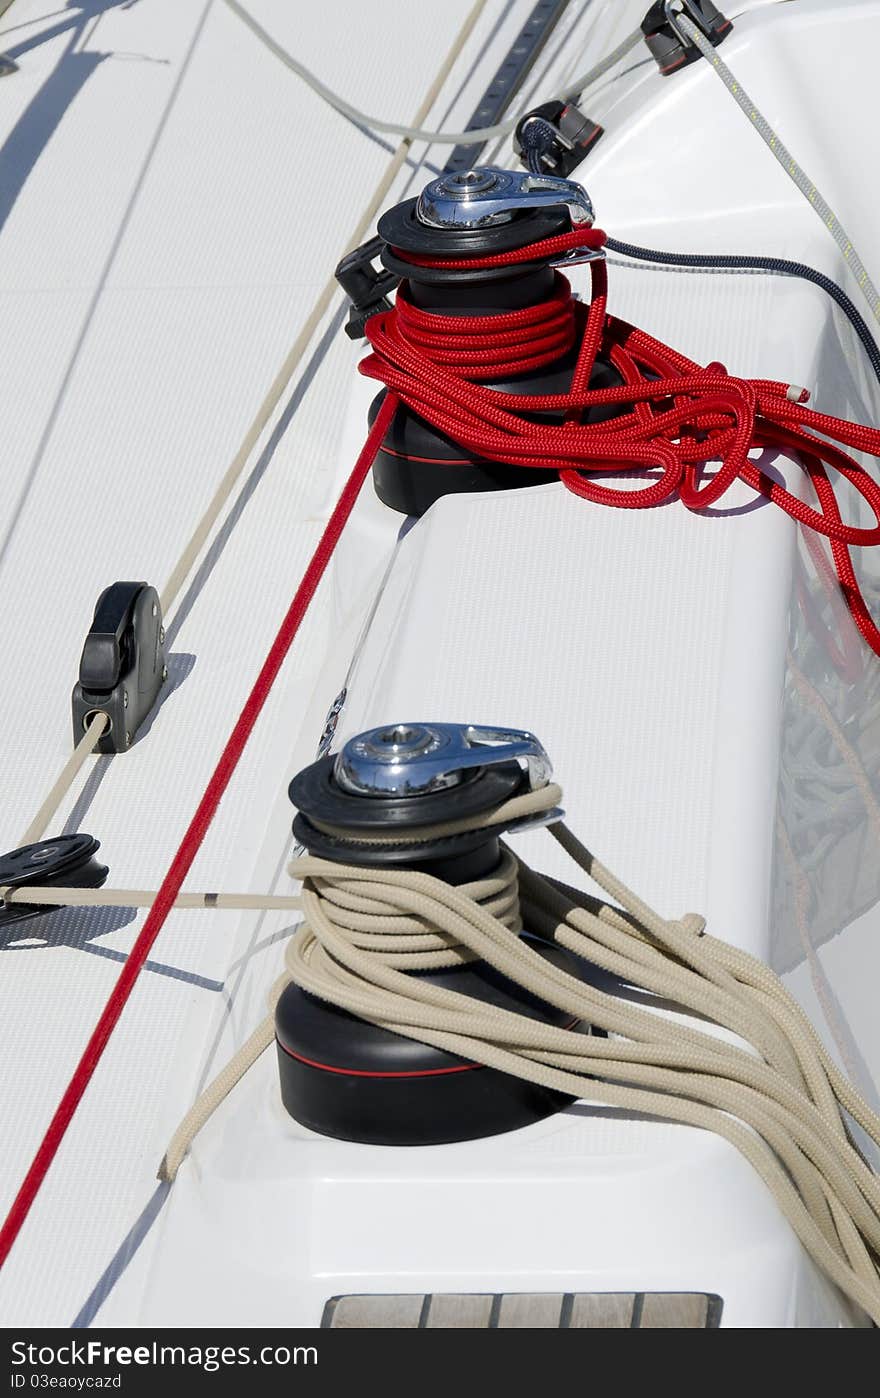 Pulley fittings on the sailboat